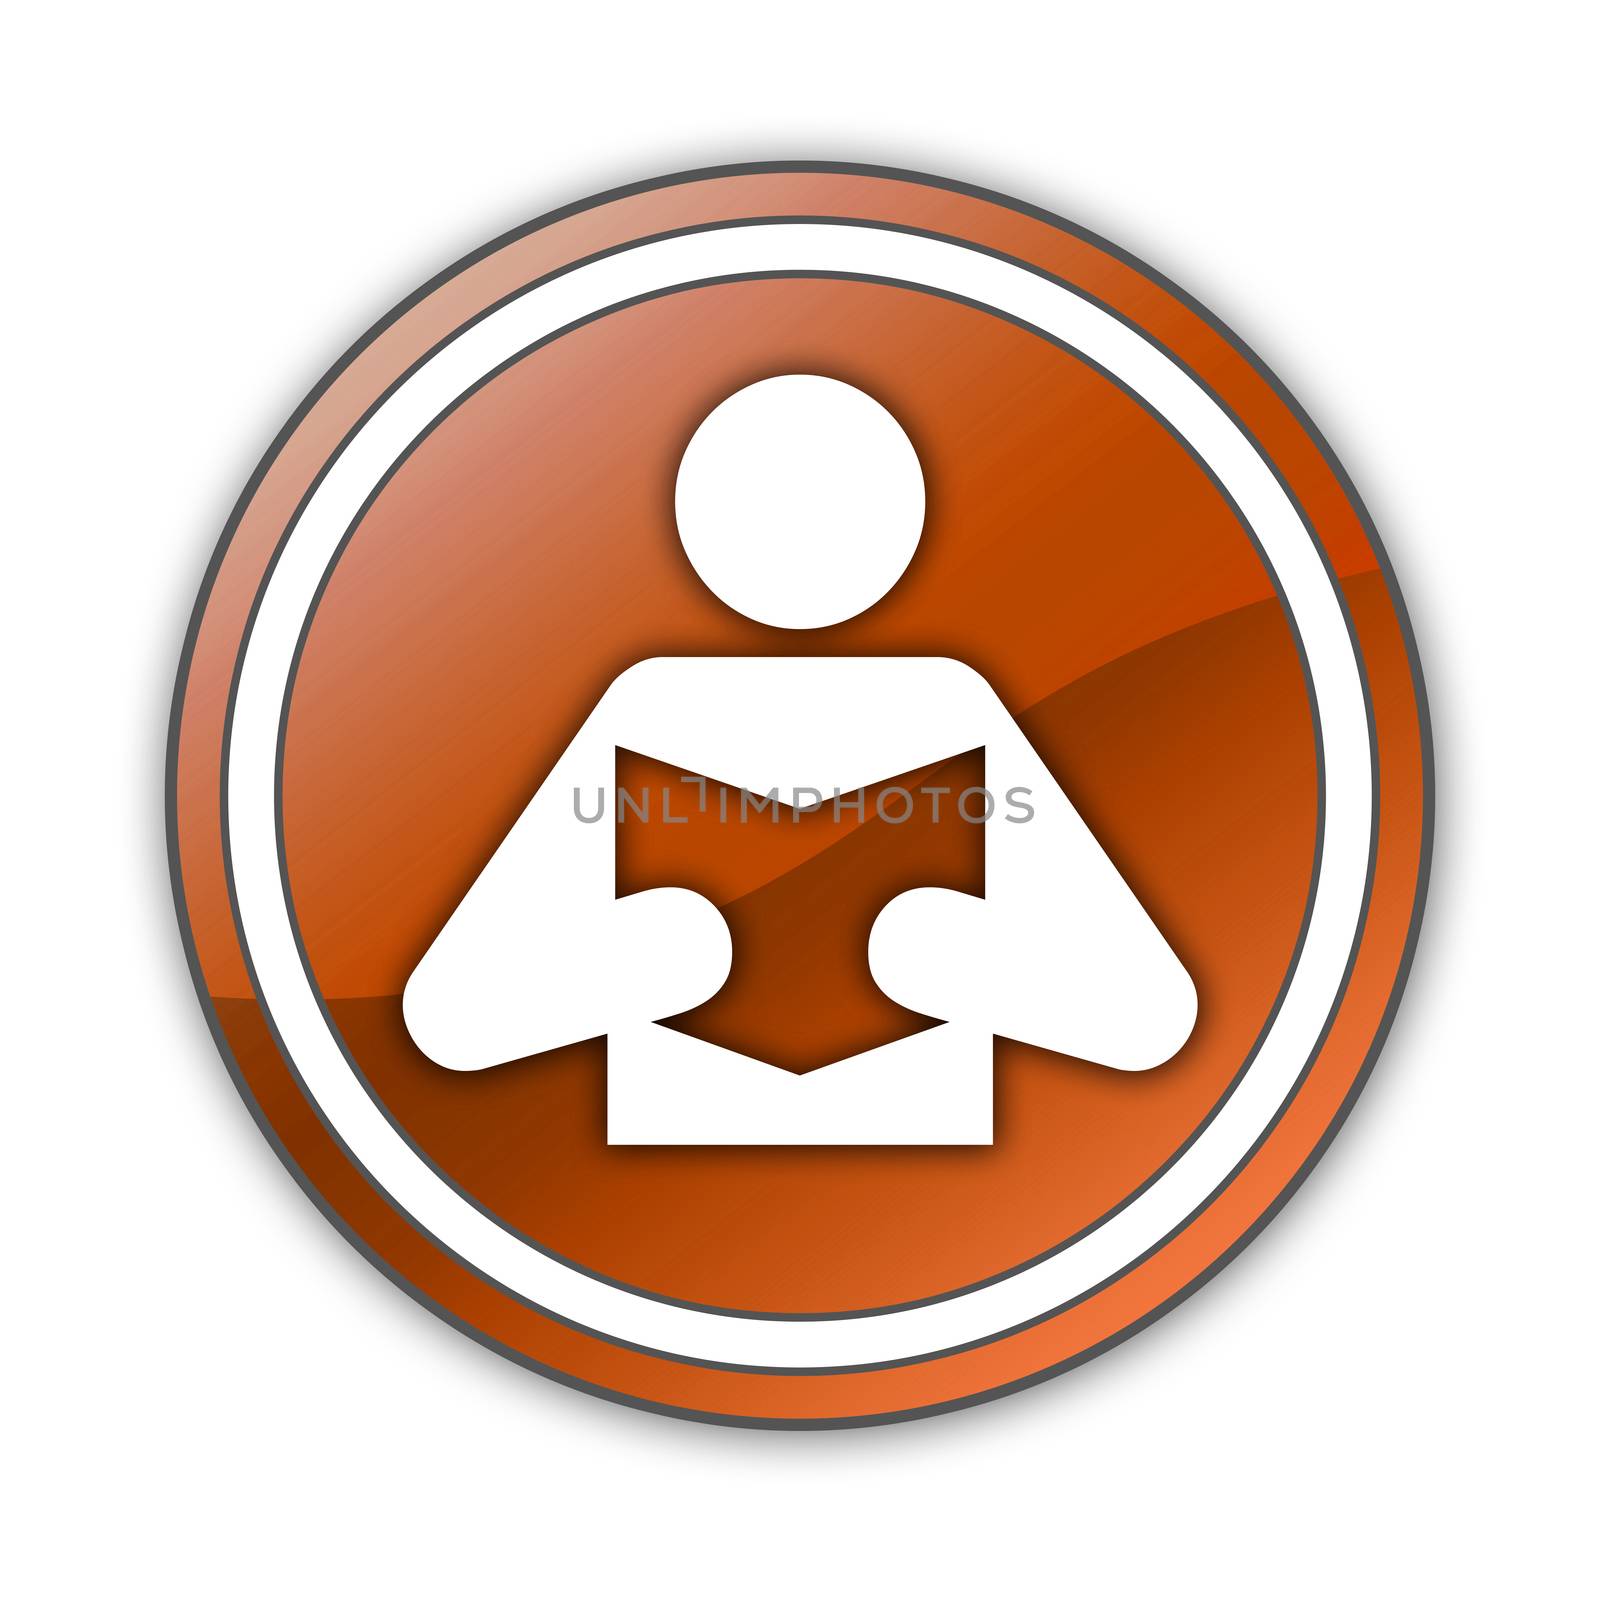 Icon, Button, Pictogram Library by mindscanner